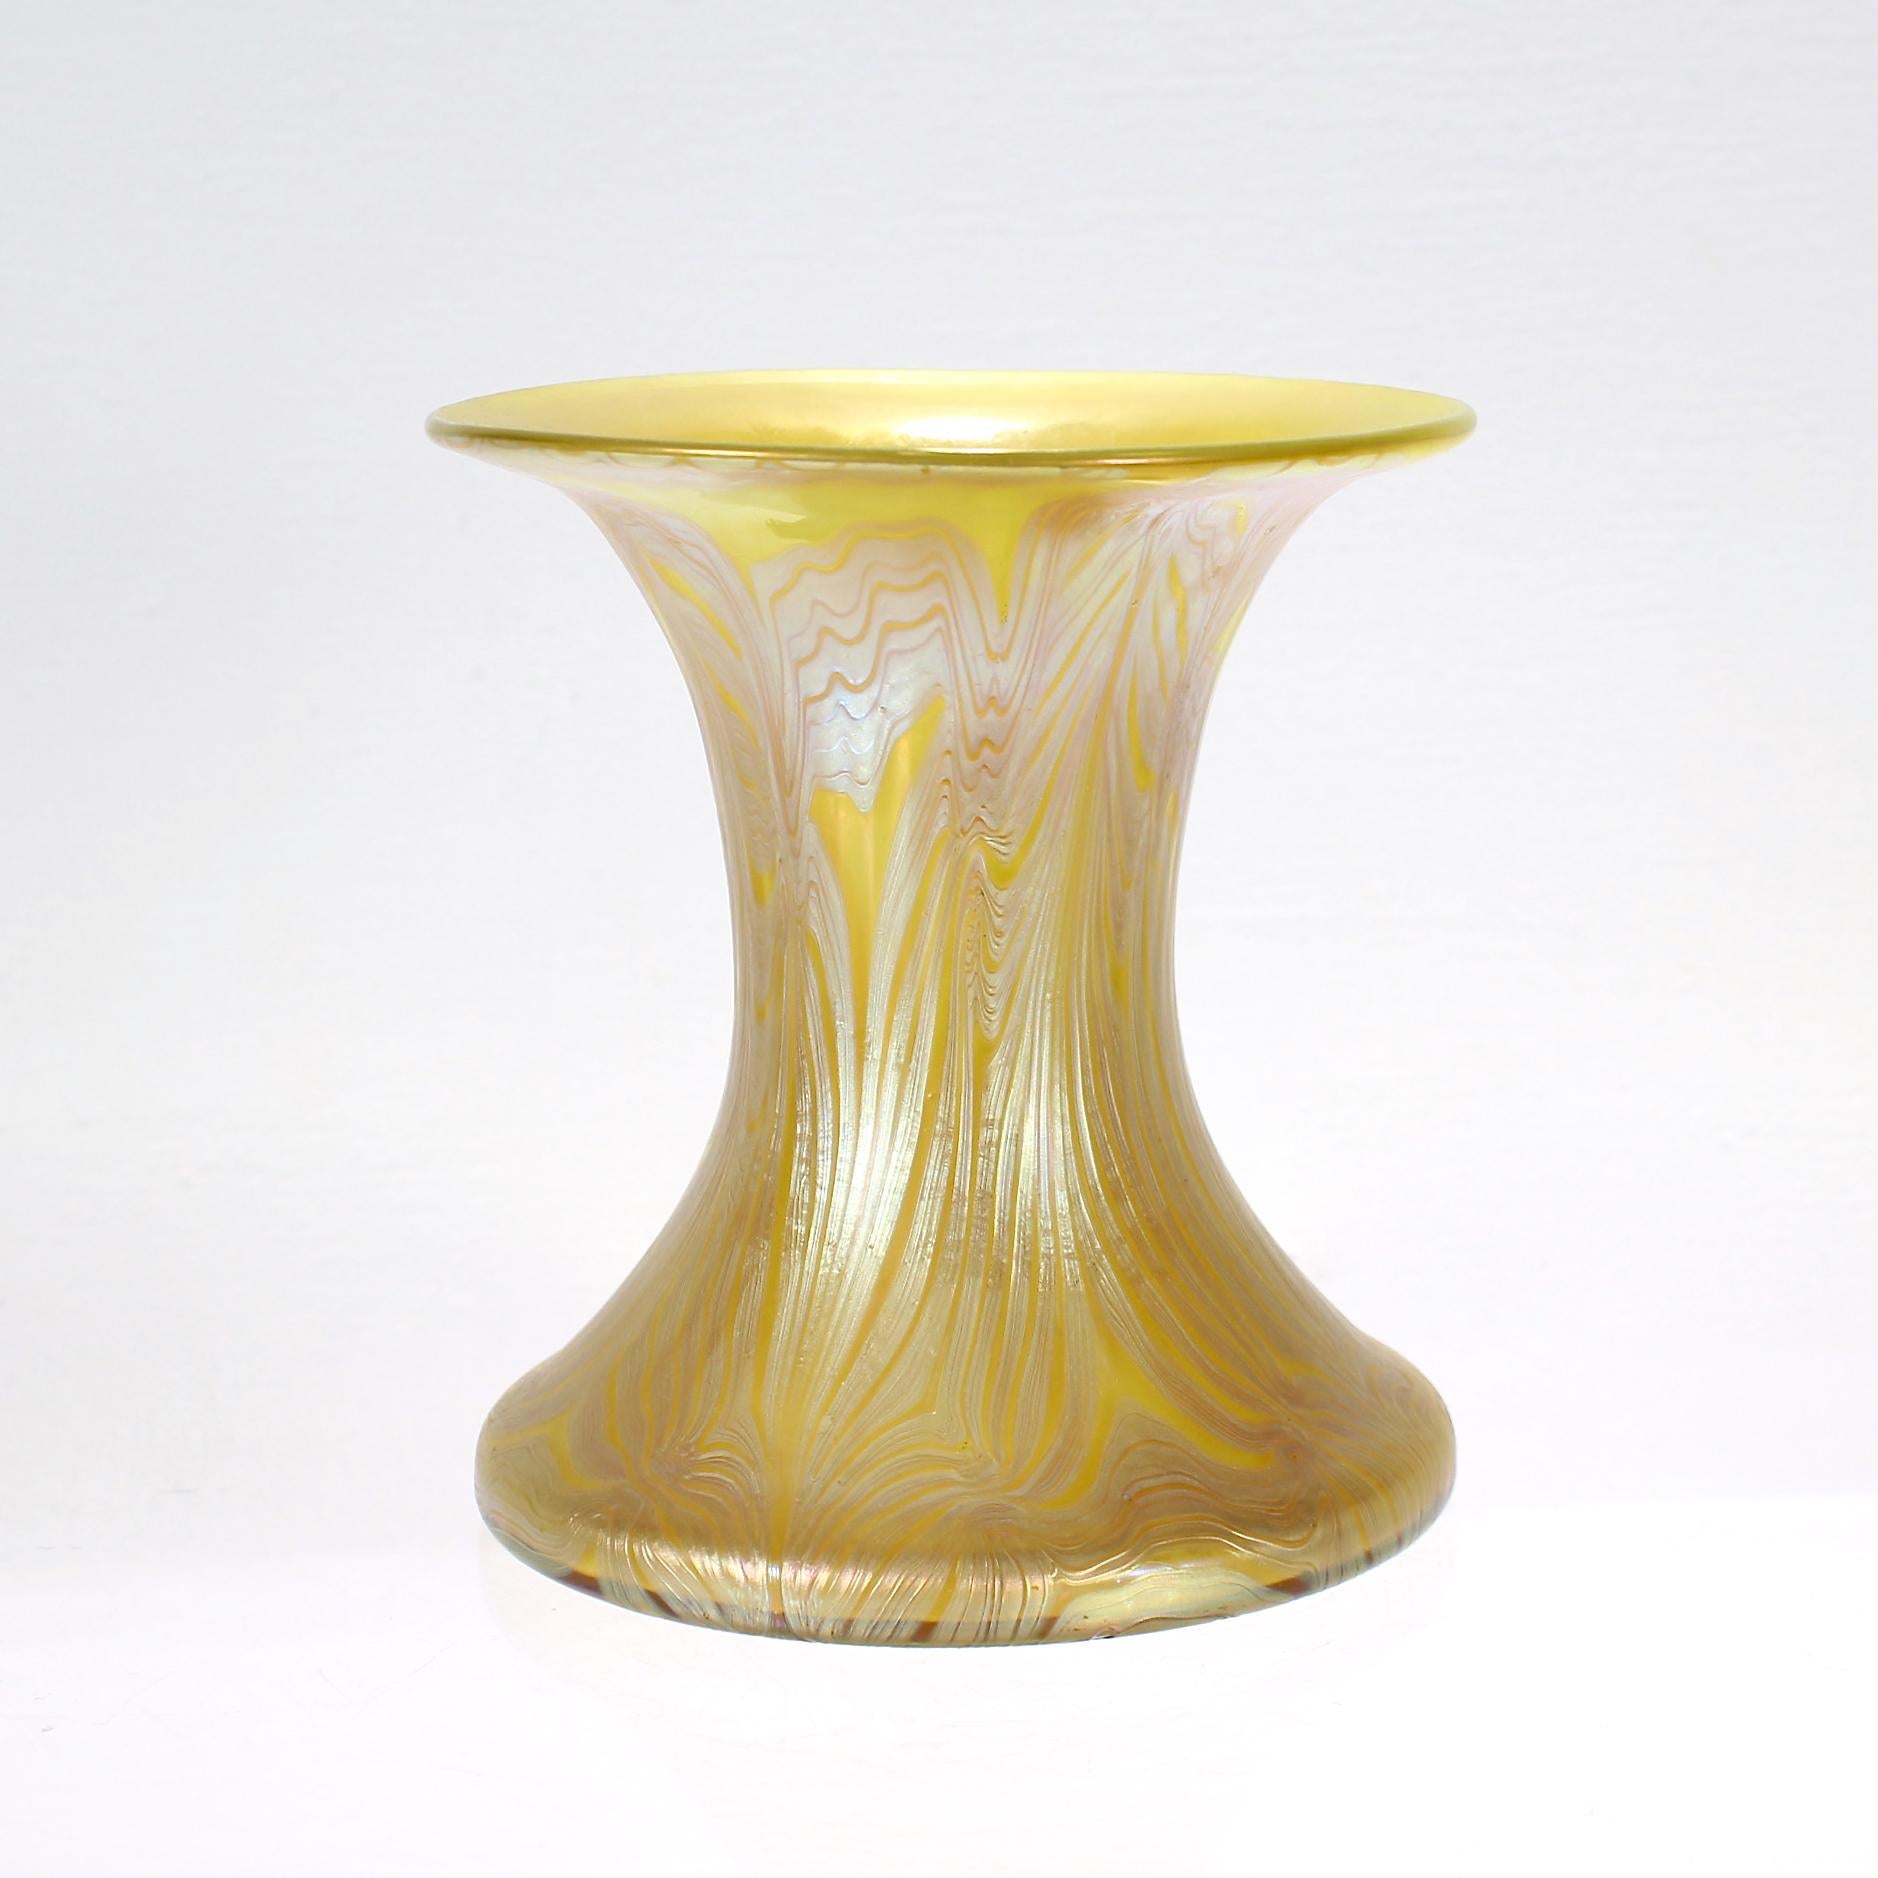 A very fine and rare, signed Austrian Art Nouveau Period art glass vase.

A so-called Phänomen or Phenomenon vase. 

With pulled silver-blue iridescent patterning applied on a yellow ground. 

By Johann Loetz Witwe.

Signed 'Loetz Austria'